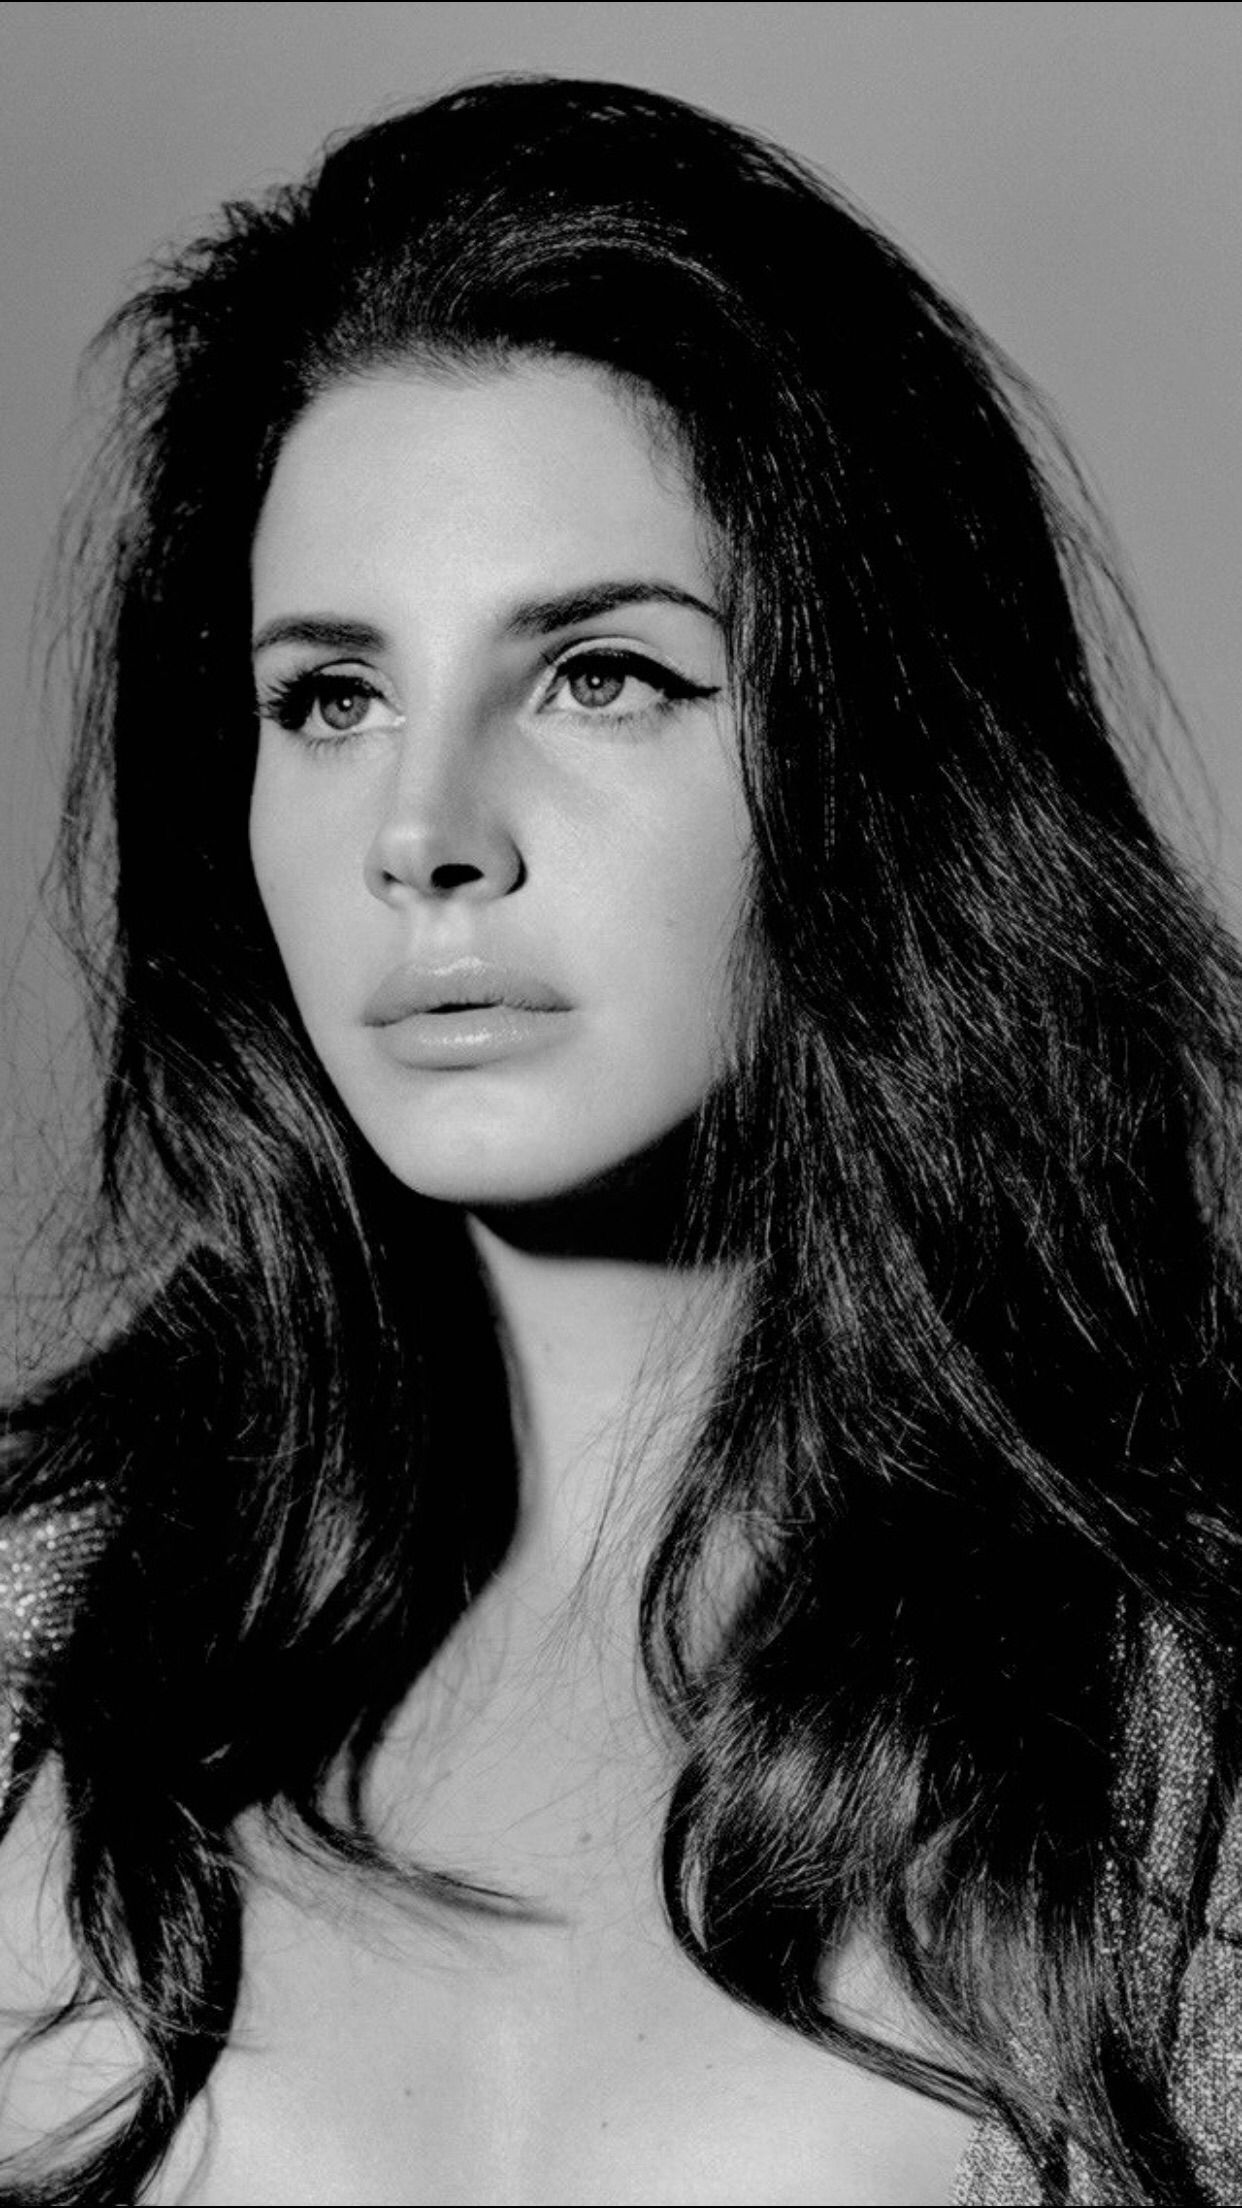 A woman with long hair and black & white photo - Lana Del Rey